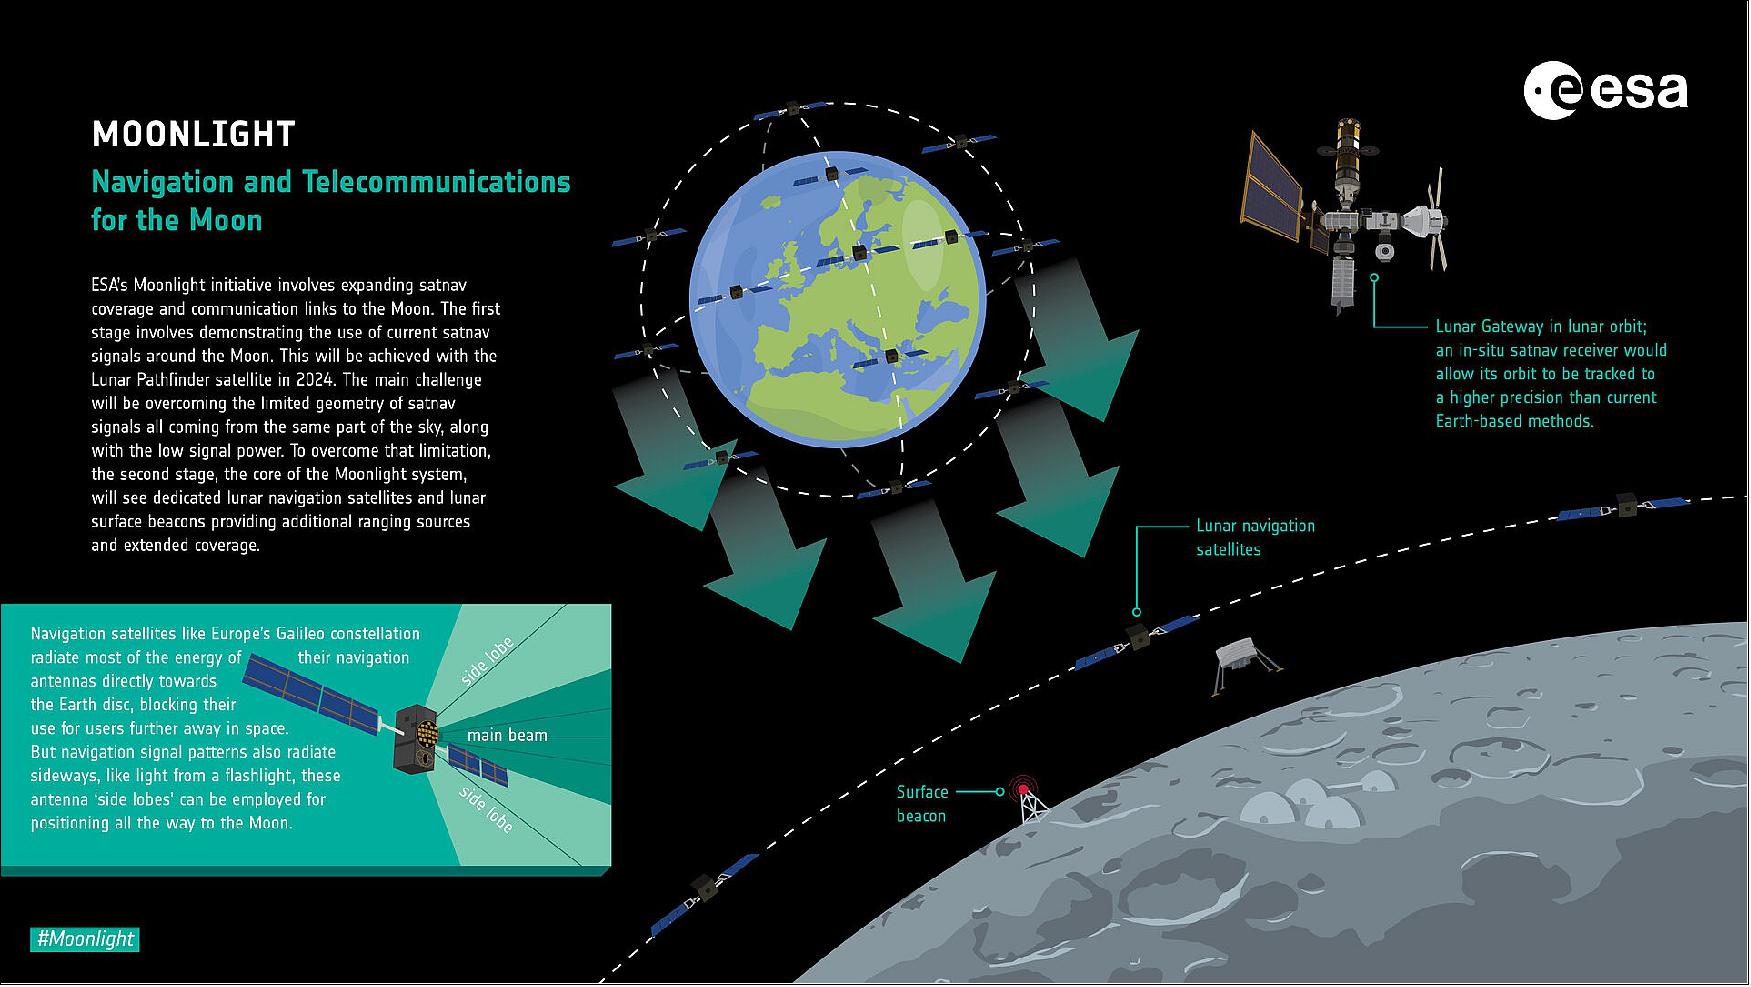 Figure 4: ESA's Moonlight initiative involves expanding satnav coverage and communication links to the Moon. The first stage involves demonstrating the use of current satnav signals around the Moon. This will be achieved with the Lunar Pathfinder satellite in 2024. The main challenge will be overcoming the limited geometry of satnav signals all coming from the same part of the sky, along with the low signal power. To overcome that limitation, the second stage, the core of the Moonlight system, will see dedicated lunar navigation satellites and lunar surface beacons providing additional ranging sources and extended coverage (image credit: ESA, K. Oldenburg)